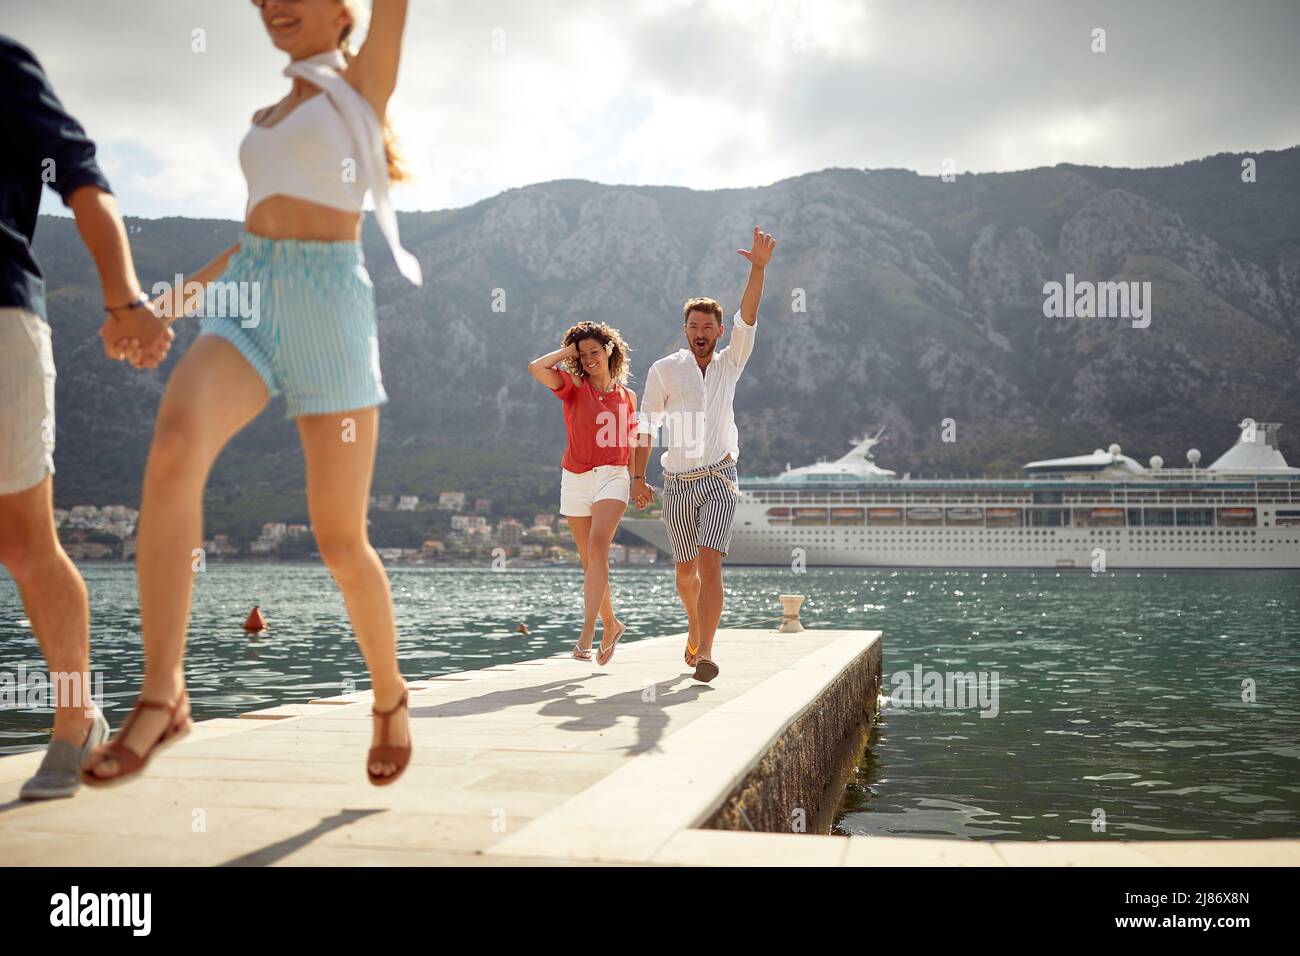 Two couples holding hands running on pier by sea. Cruiser, city and mountains in background. Fun, togetherness, travel concept. Stock Photo